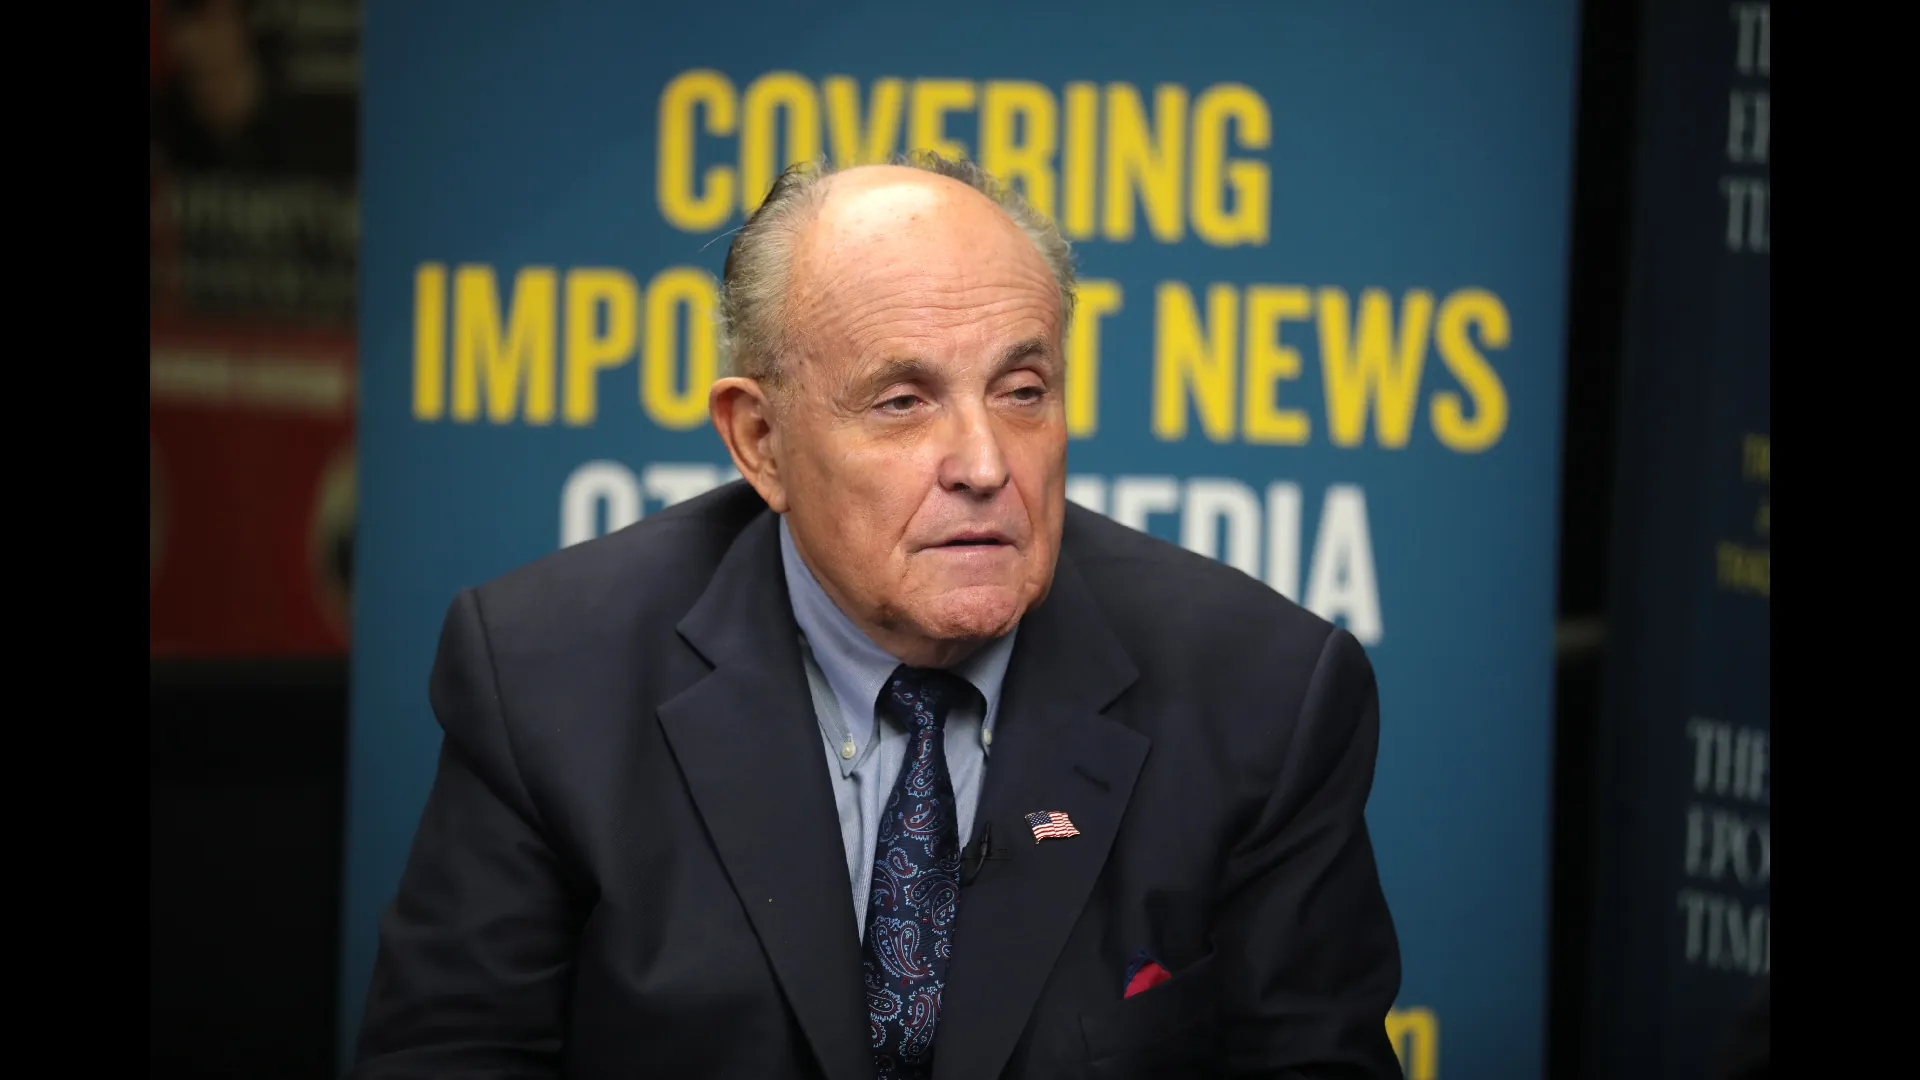 Giuliani Concedes Defamatory Statements, Stands Firm on Protected Speech about Voter Fraud